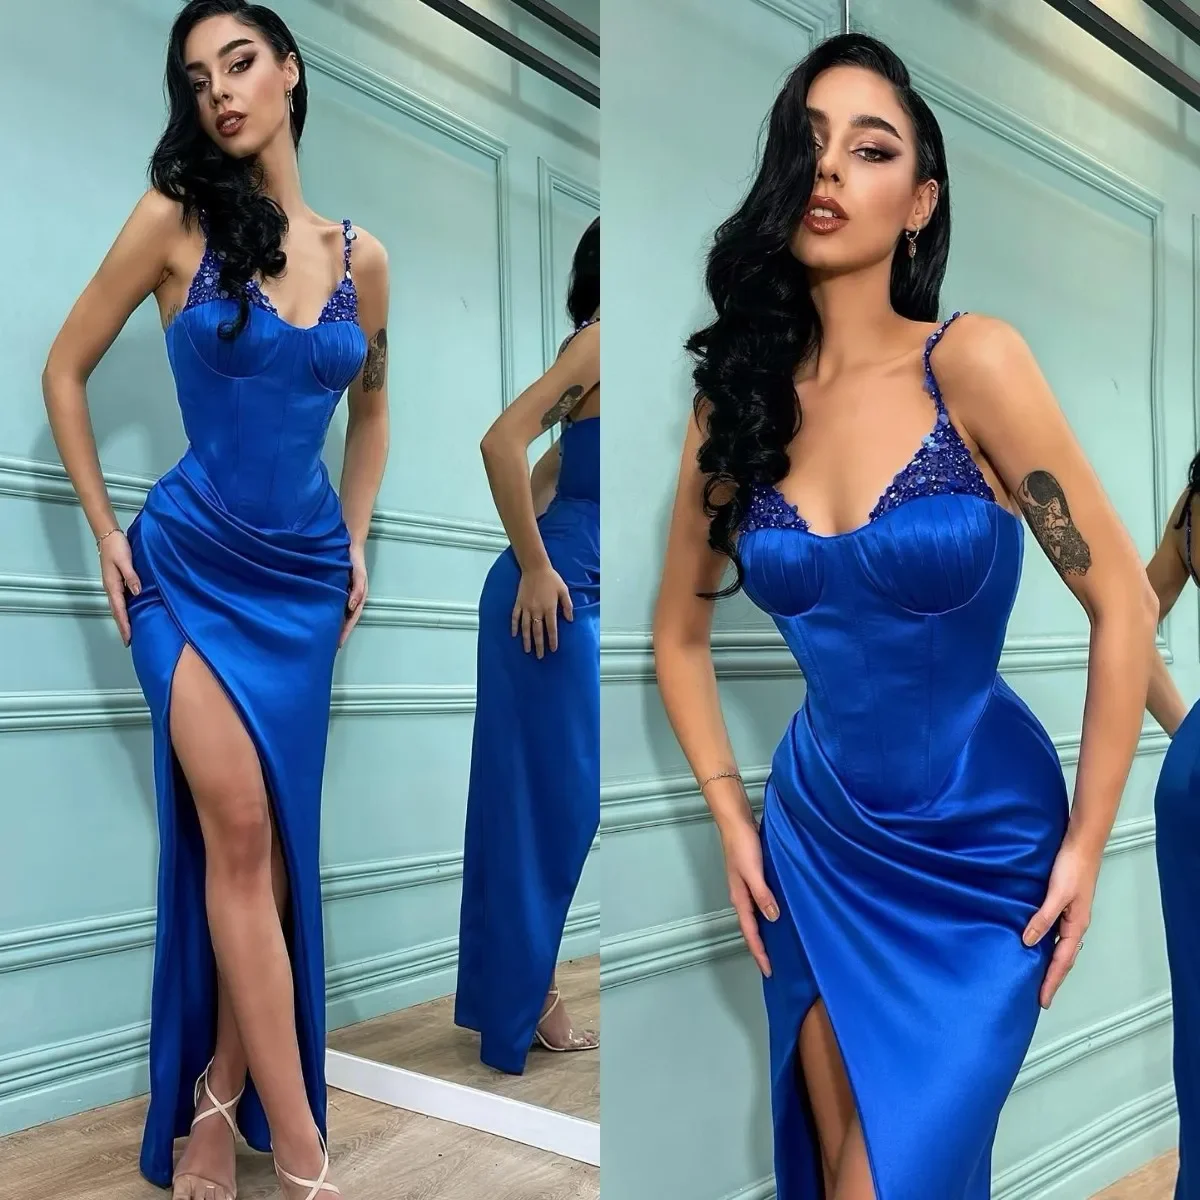 

Mermaid Crystal Luxury Ball Dress Sexy Sweetheart backless slit elegant Ladies formal dress Cocktail Party Evening dress